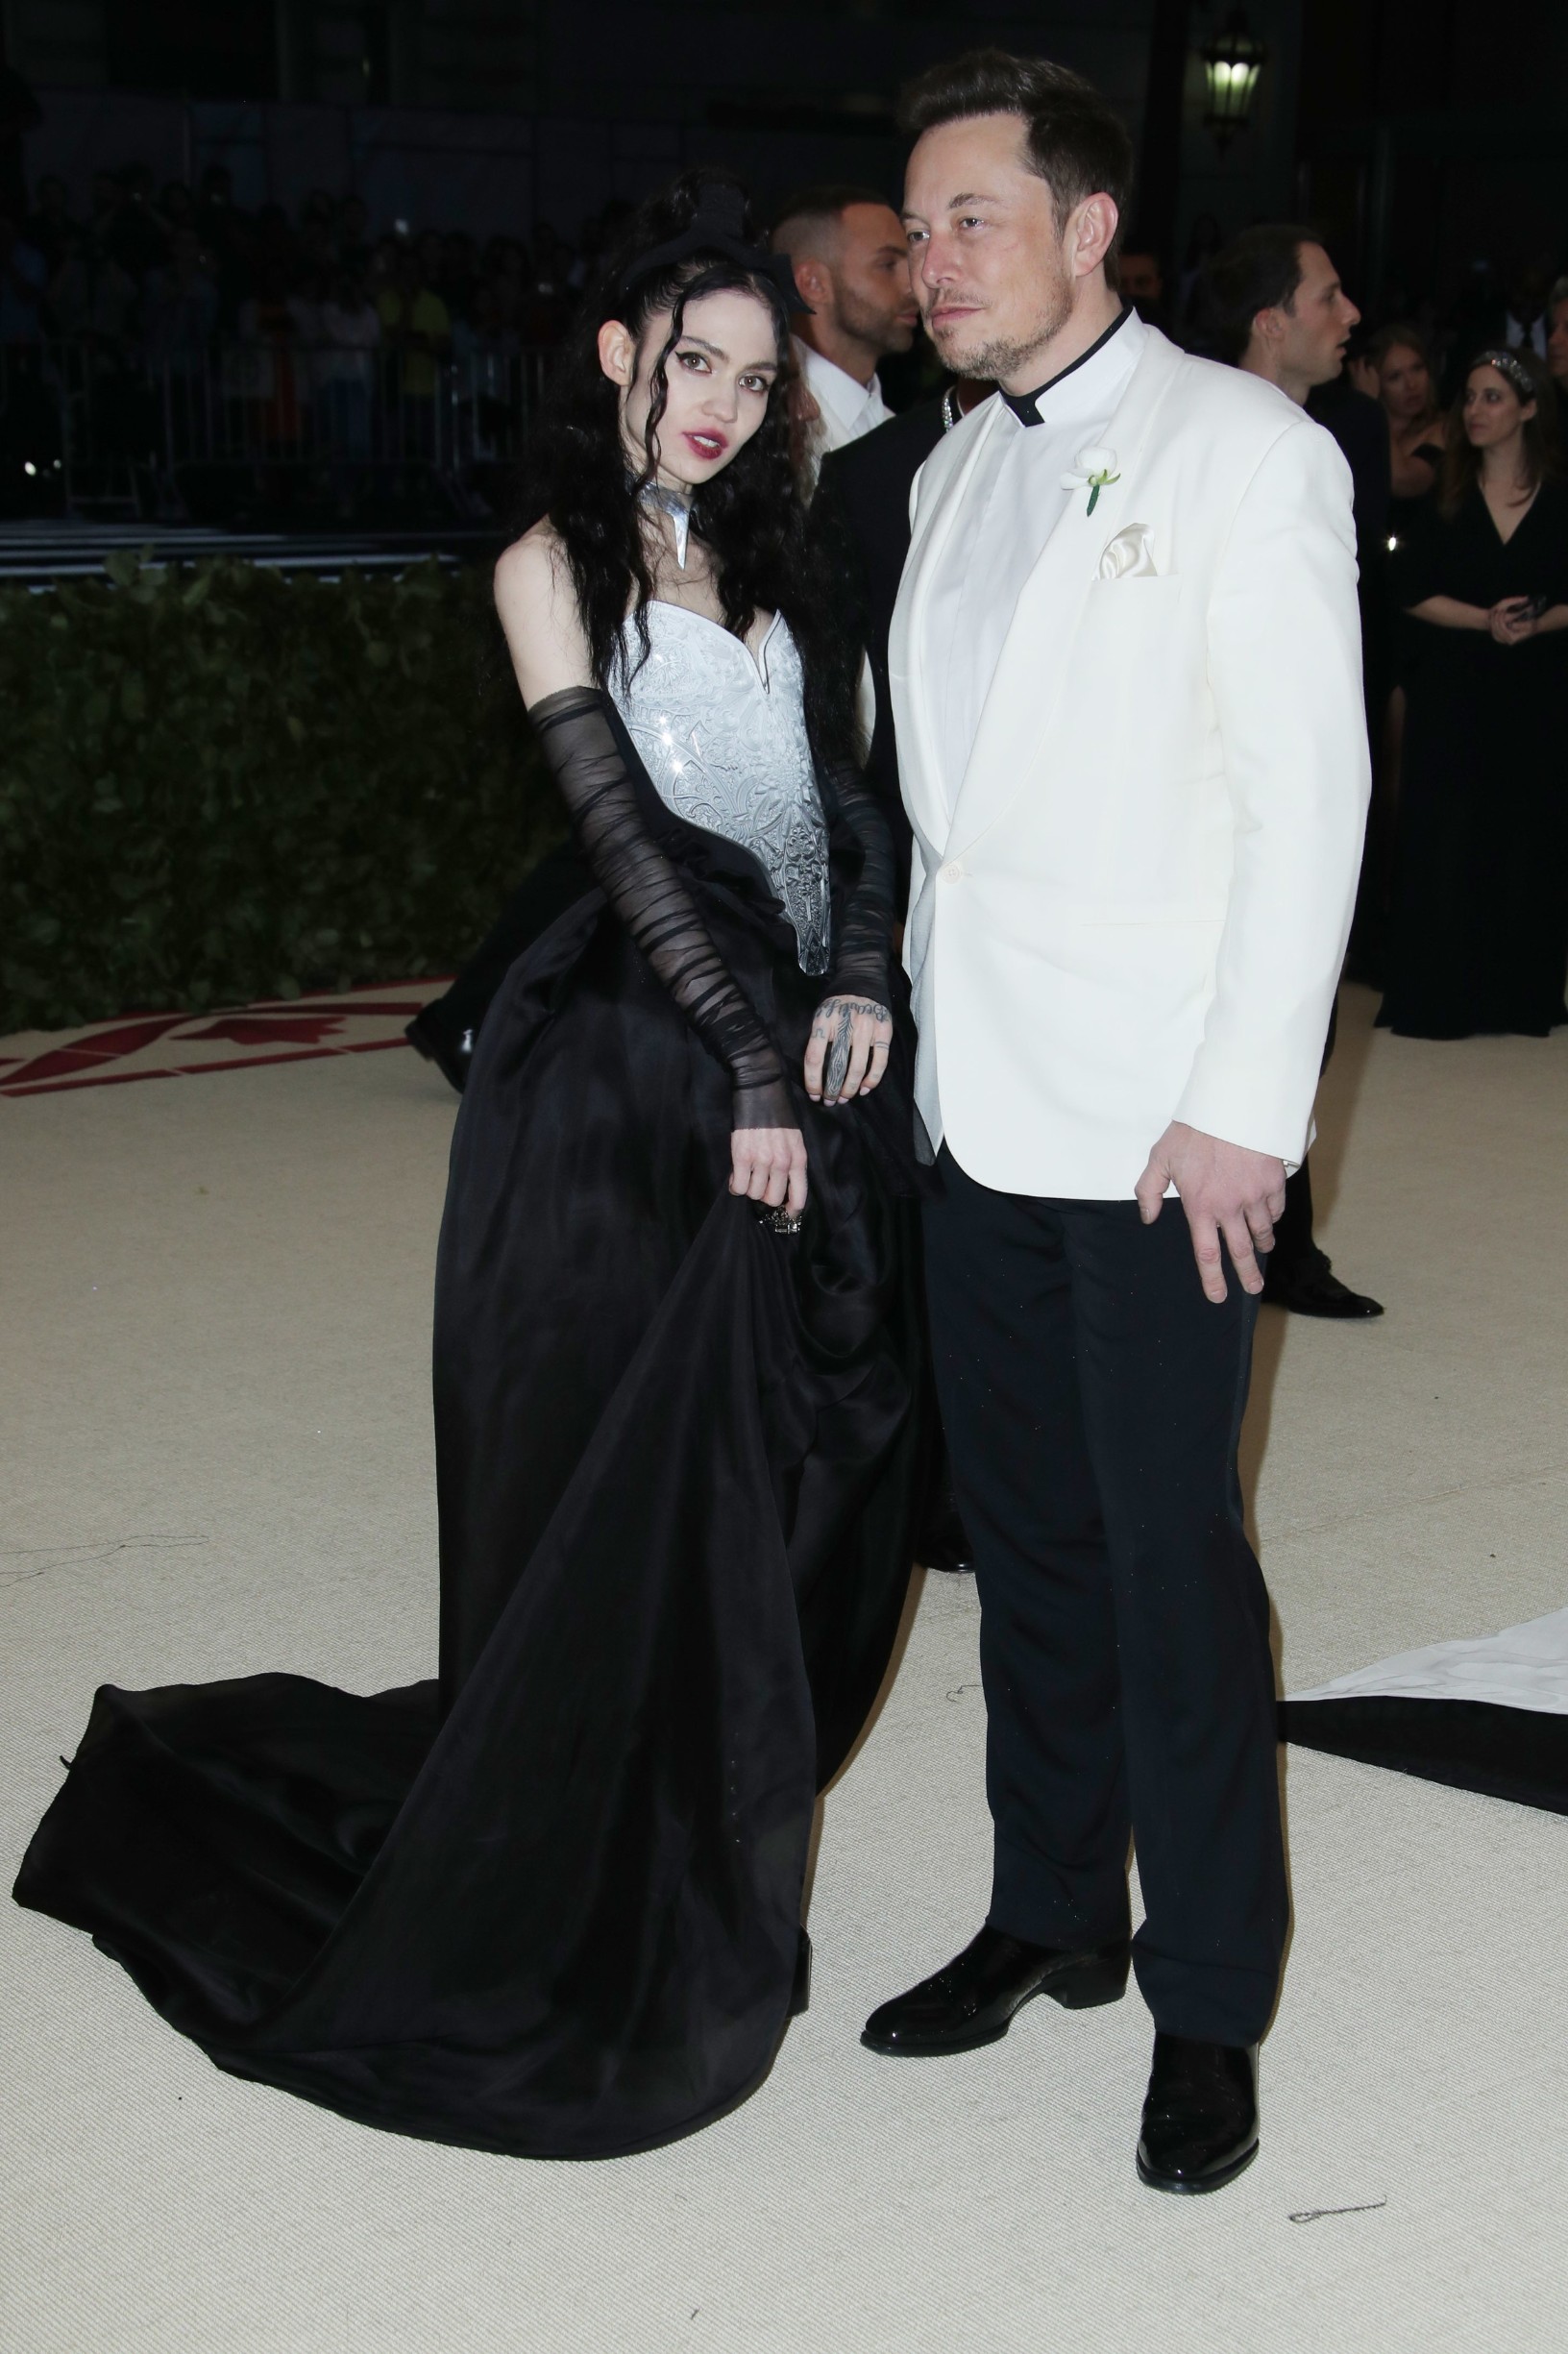 Grimes and Elon Musk
The Metropolitan Museum of Art's Costume Institute Benefit celebrating the opening of Heavenly Bodies: Fashion and the Catholic Imagination, Arrivals, New York, USA - 07 May 2018, Image: 370891664, License: Rights-managed, Restrictions: , Model Release: no, Credit line: Matt Baron / Shutterstock Editorial / Profimedia